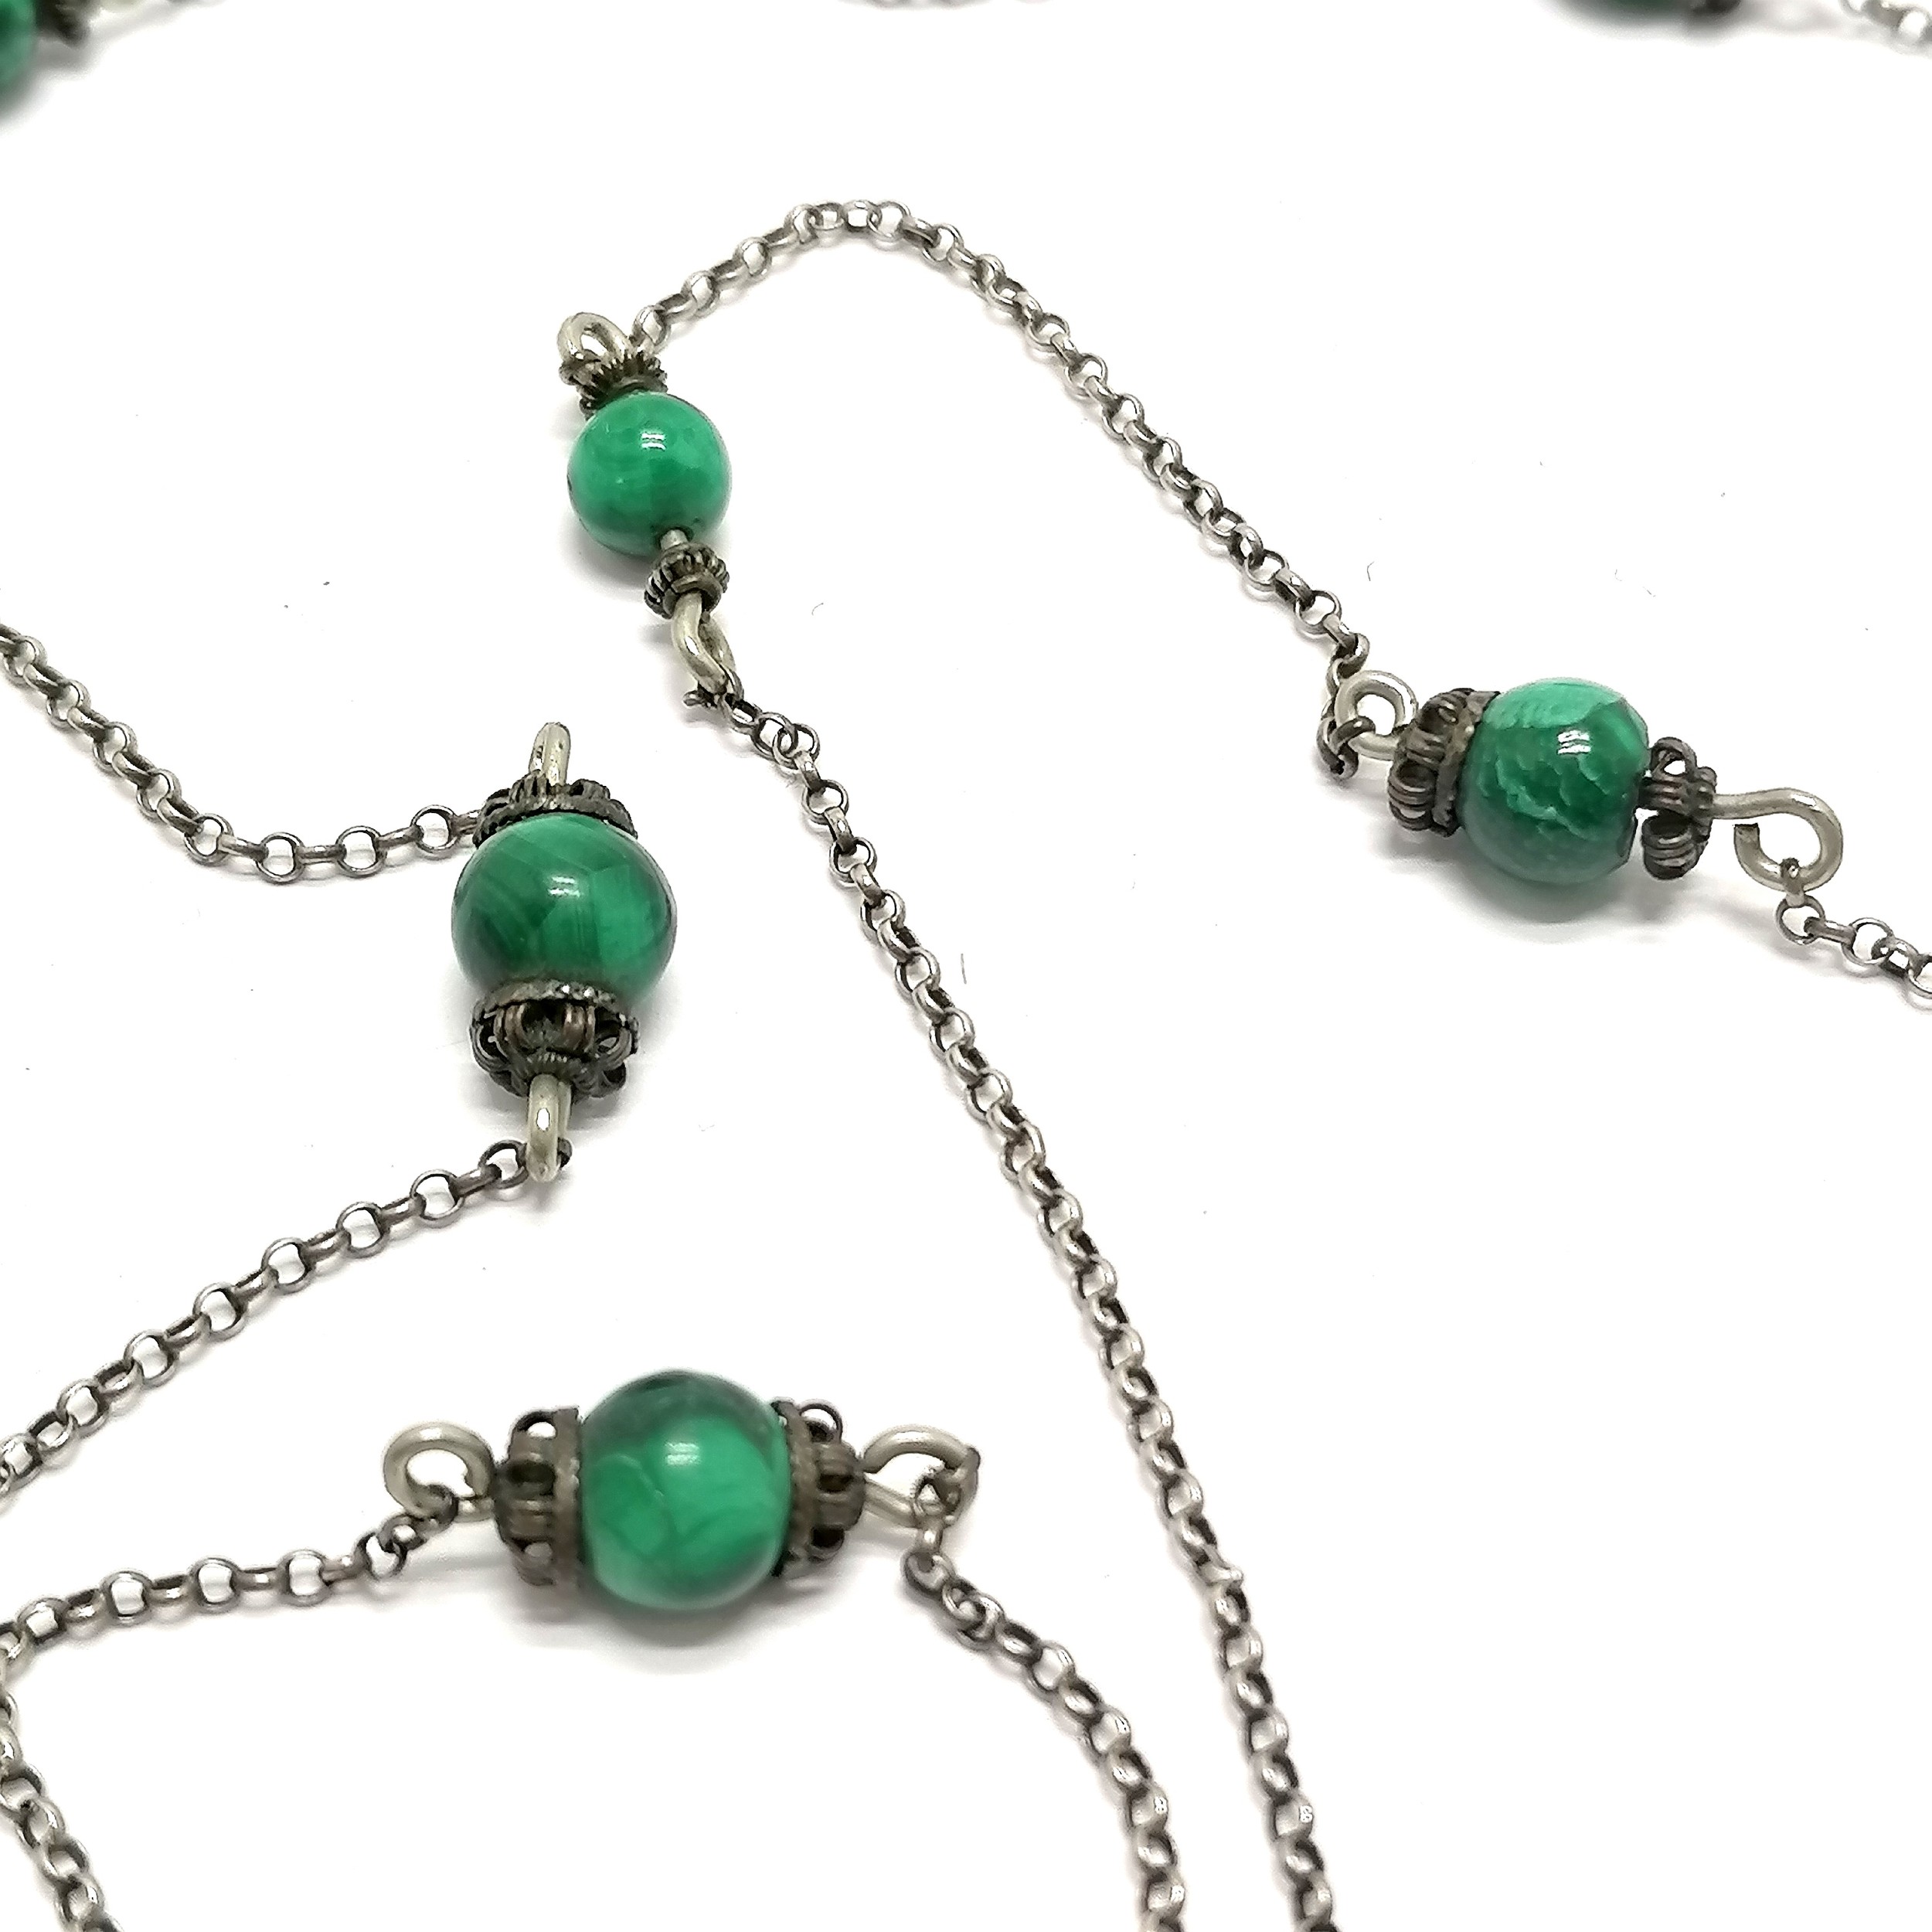 Antique unmarked silver languard chain with malachite bead detail - 138cm & 24g total weight ~ has